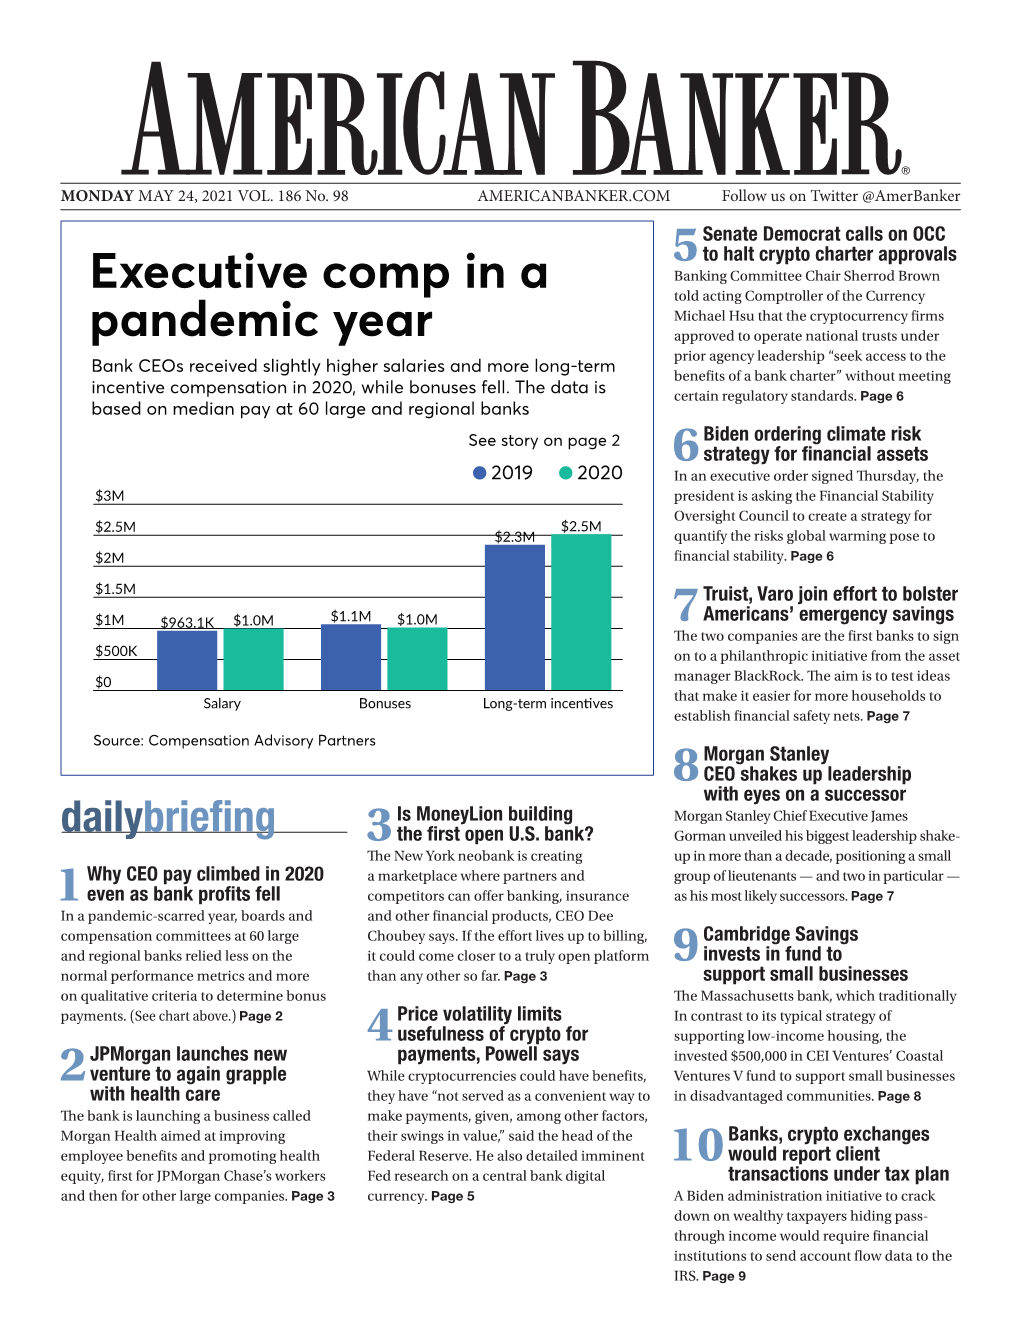 Executive Comp in a Pandemic Year